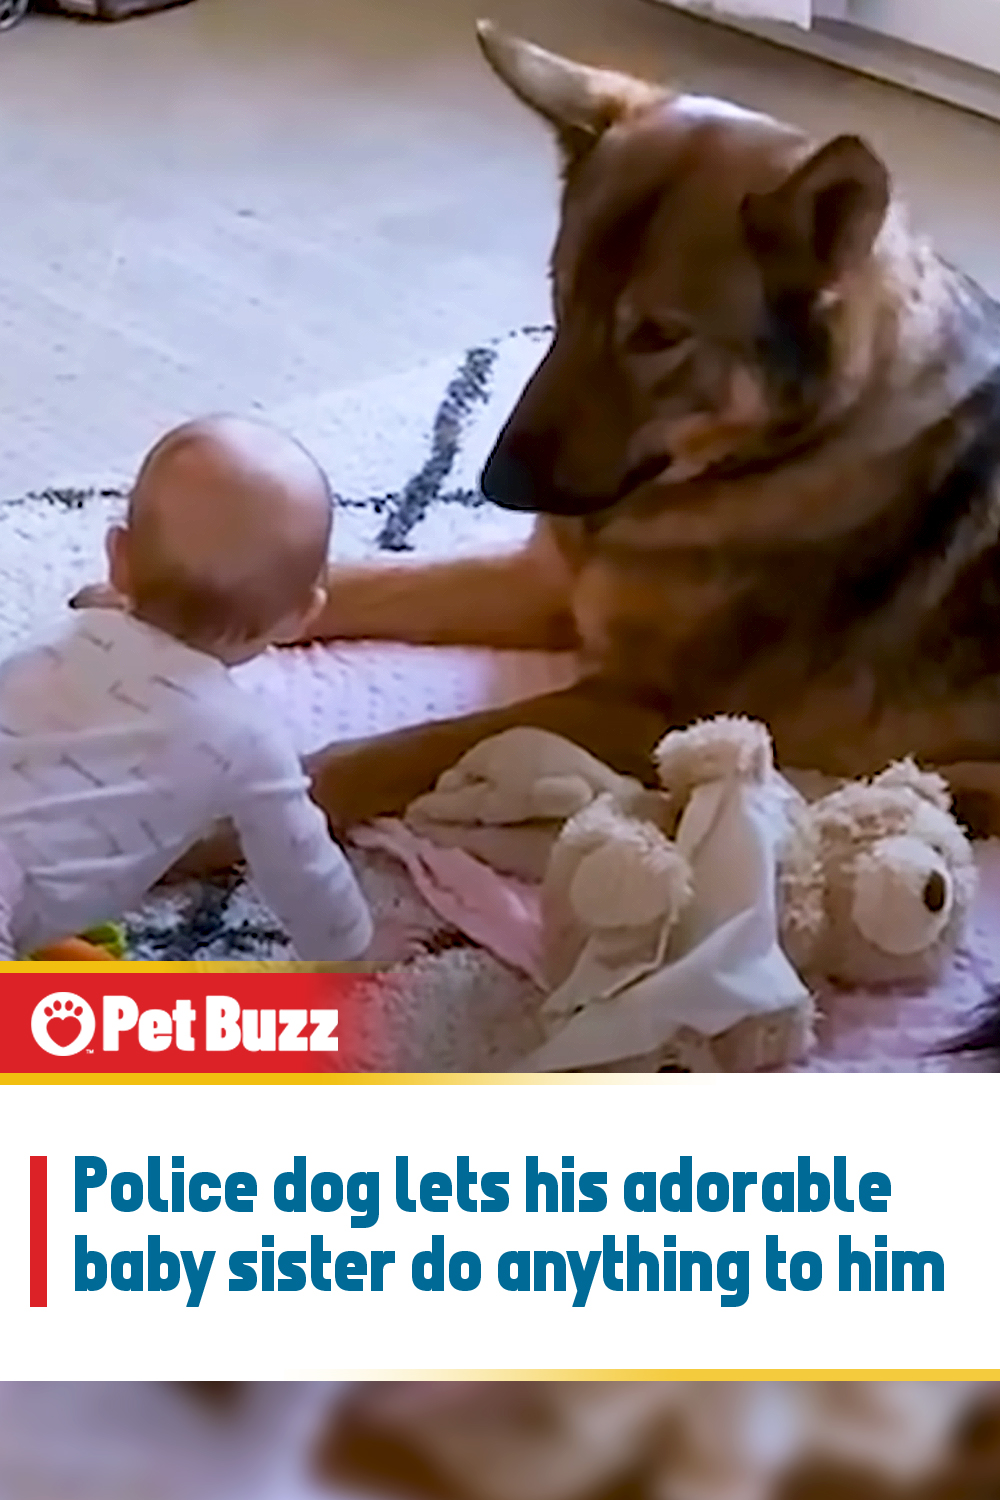 Police dog lets his adorable baby sister do anything to him